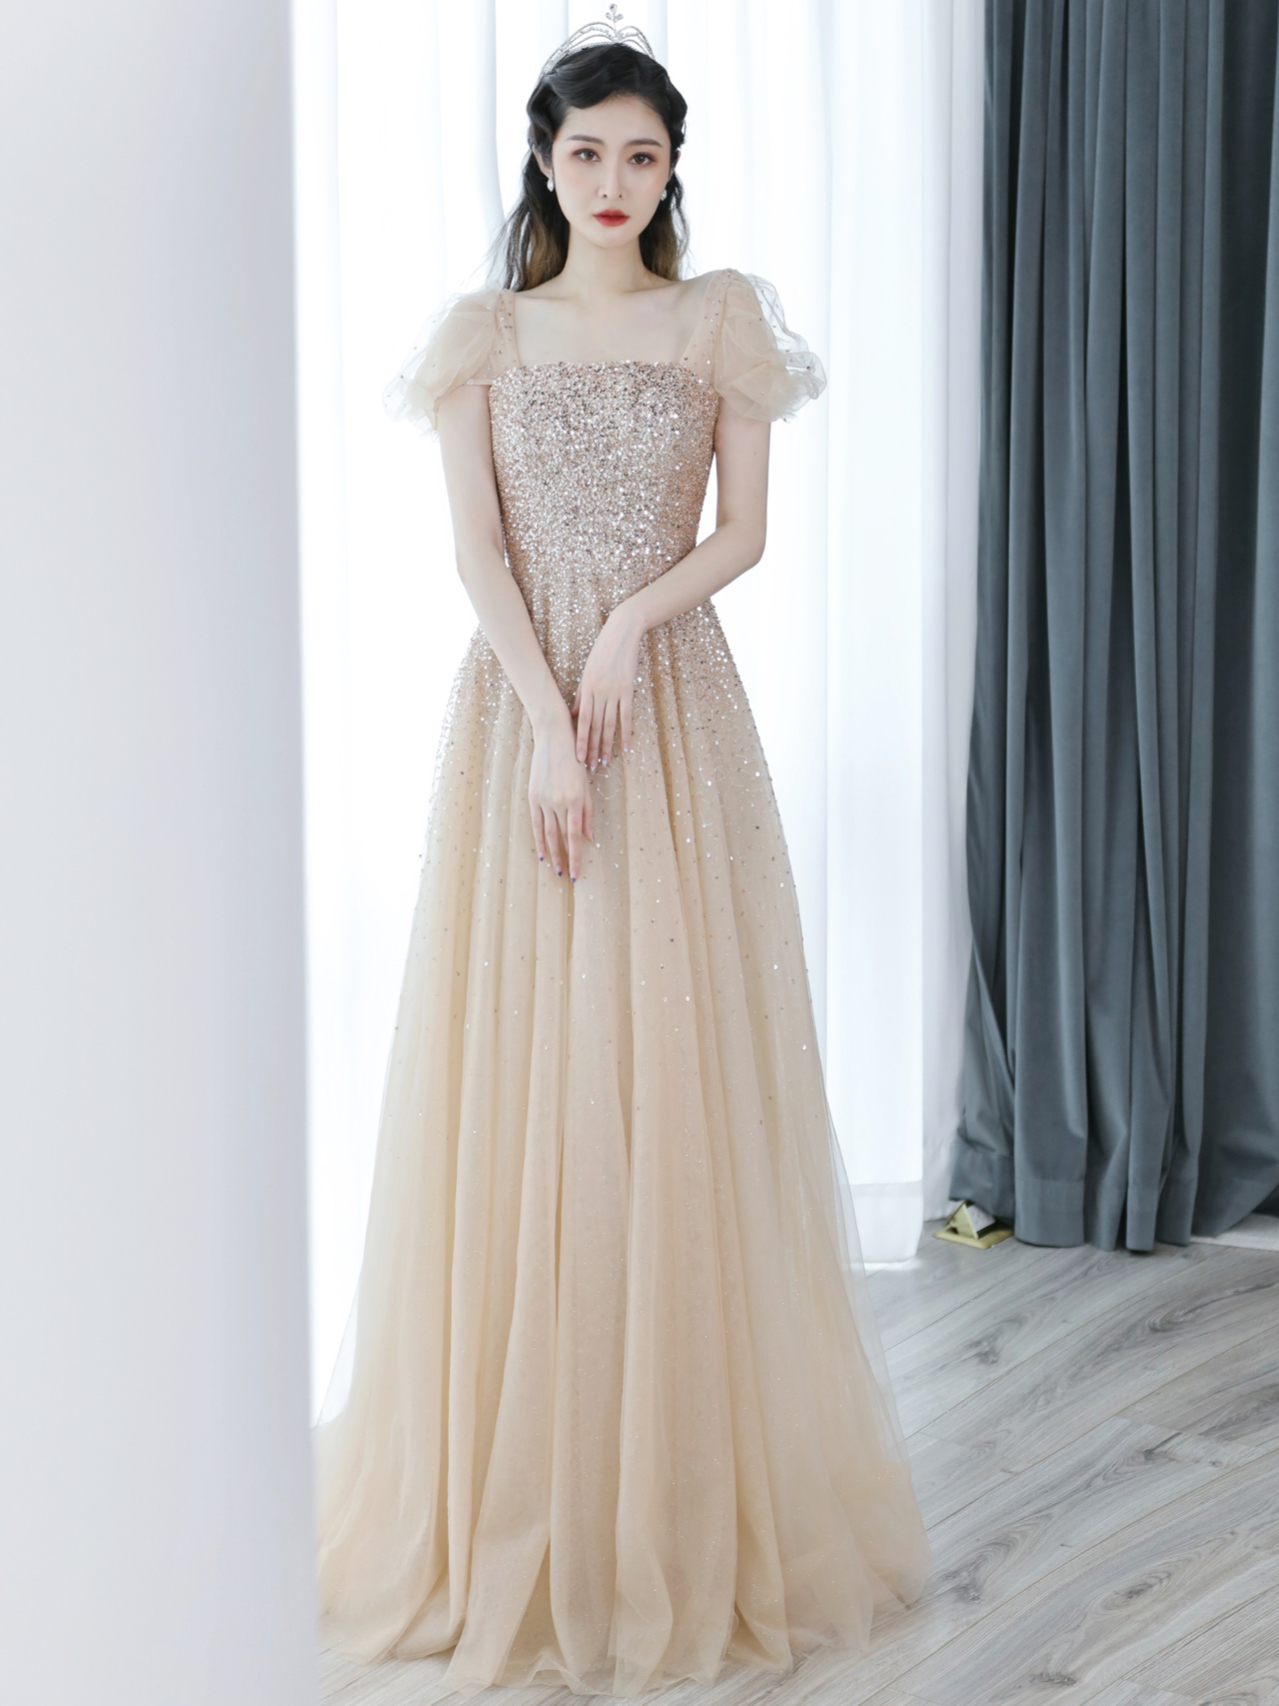 Light Champagne Sequins And Tulle Princess Long Prom Dress, A-line Long Formal Dresses